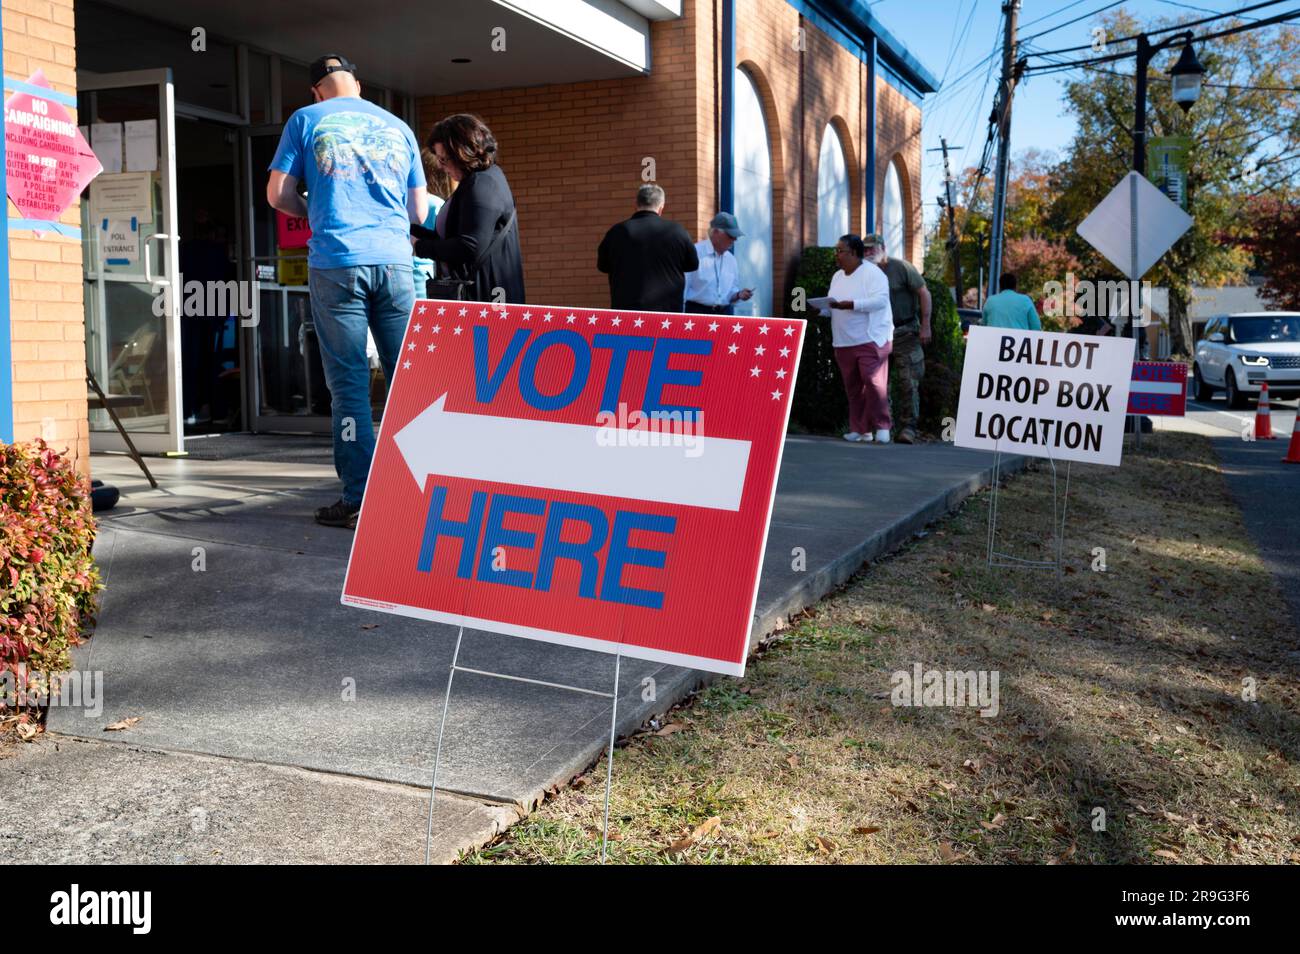 Oct 27, 2022 - Canton, Georgia, USA - Early voters queue outside voting location in Canton, Georgia, a small town in north Georgia with Georgia voters continuing to hit record breaking turnout on second week of early voting. Georgia is well over the One Million mark with 1,017,732 voters casting their ballot during Early Voting, with 124,508 showing up on Tuesday. Georgia has had record Early Voting turnout since the first day of Early Voting this year, surging to nearly twice the number on the first day of Early Voting in 2018 according the Secretary of State records. (Credit Image: © Robin R Stock Photo